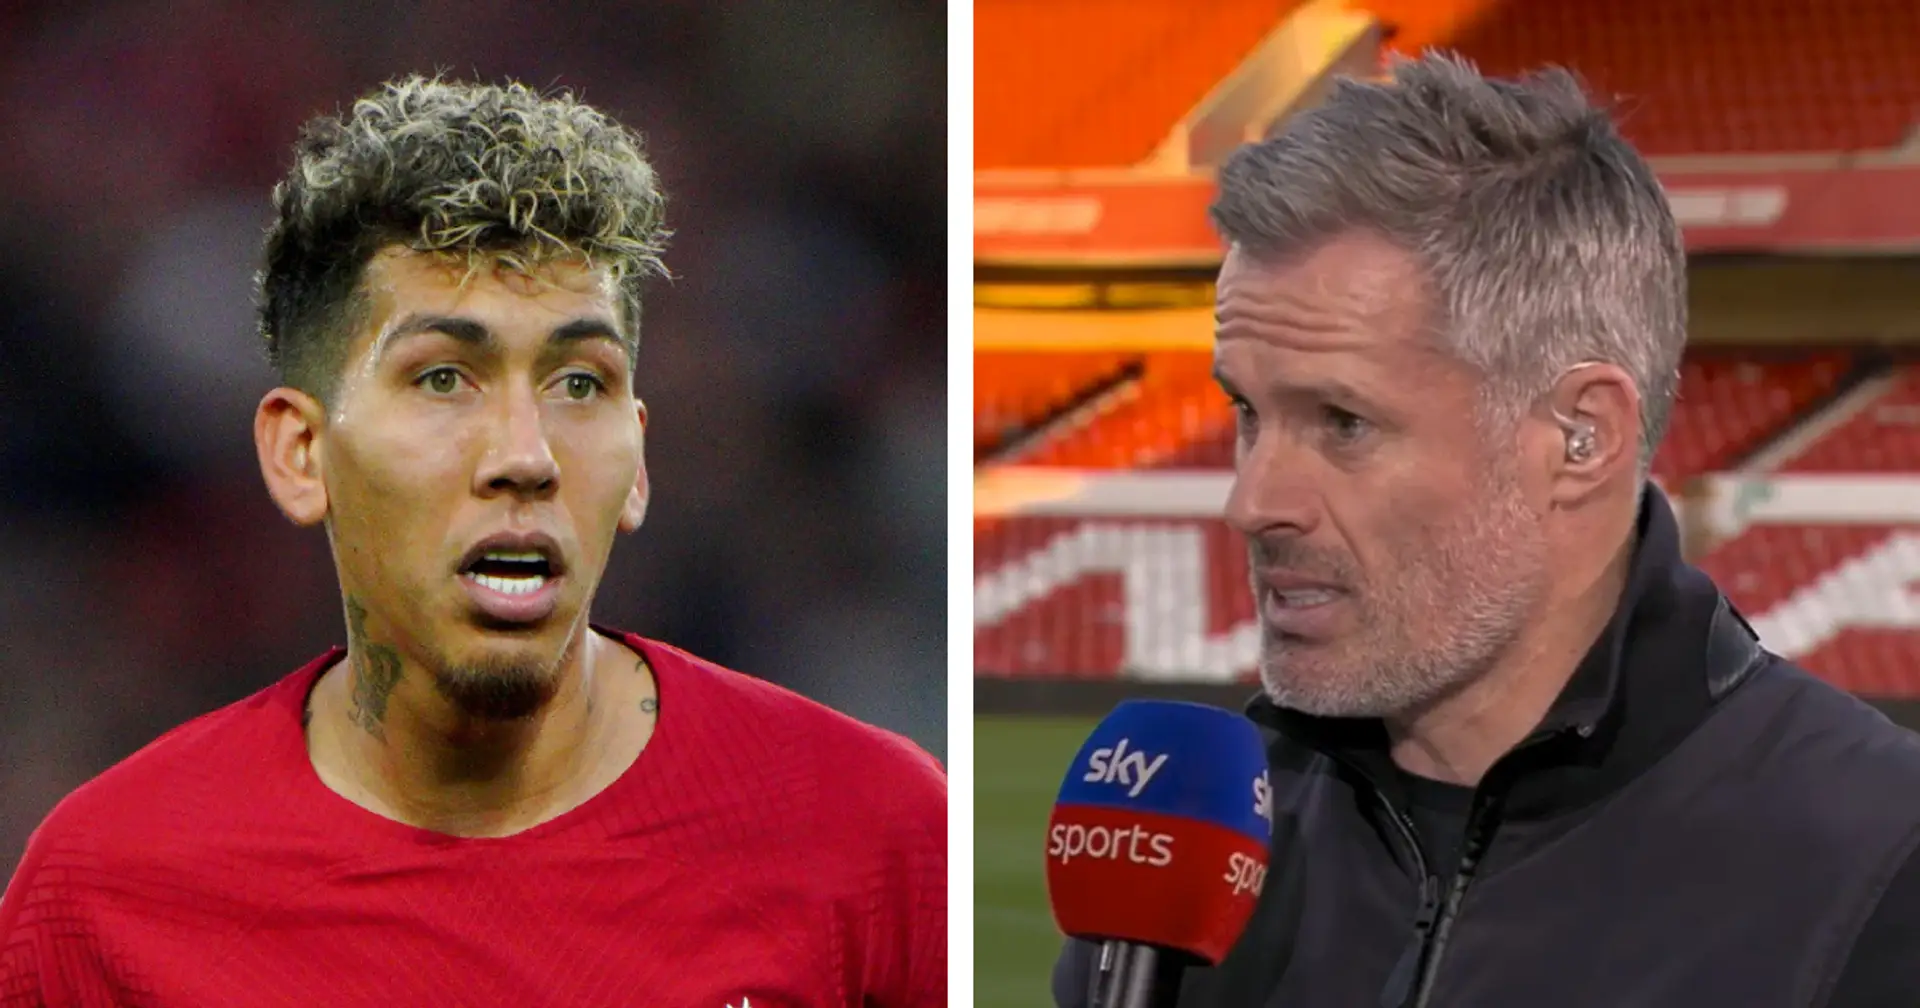 'It was never about goals': Carragher delivers verdict on Firmino's Liverpool career